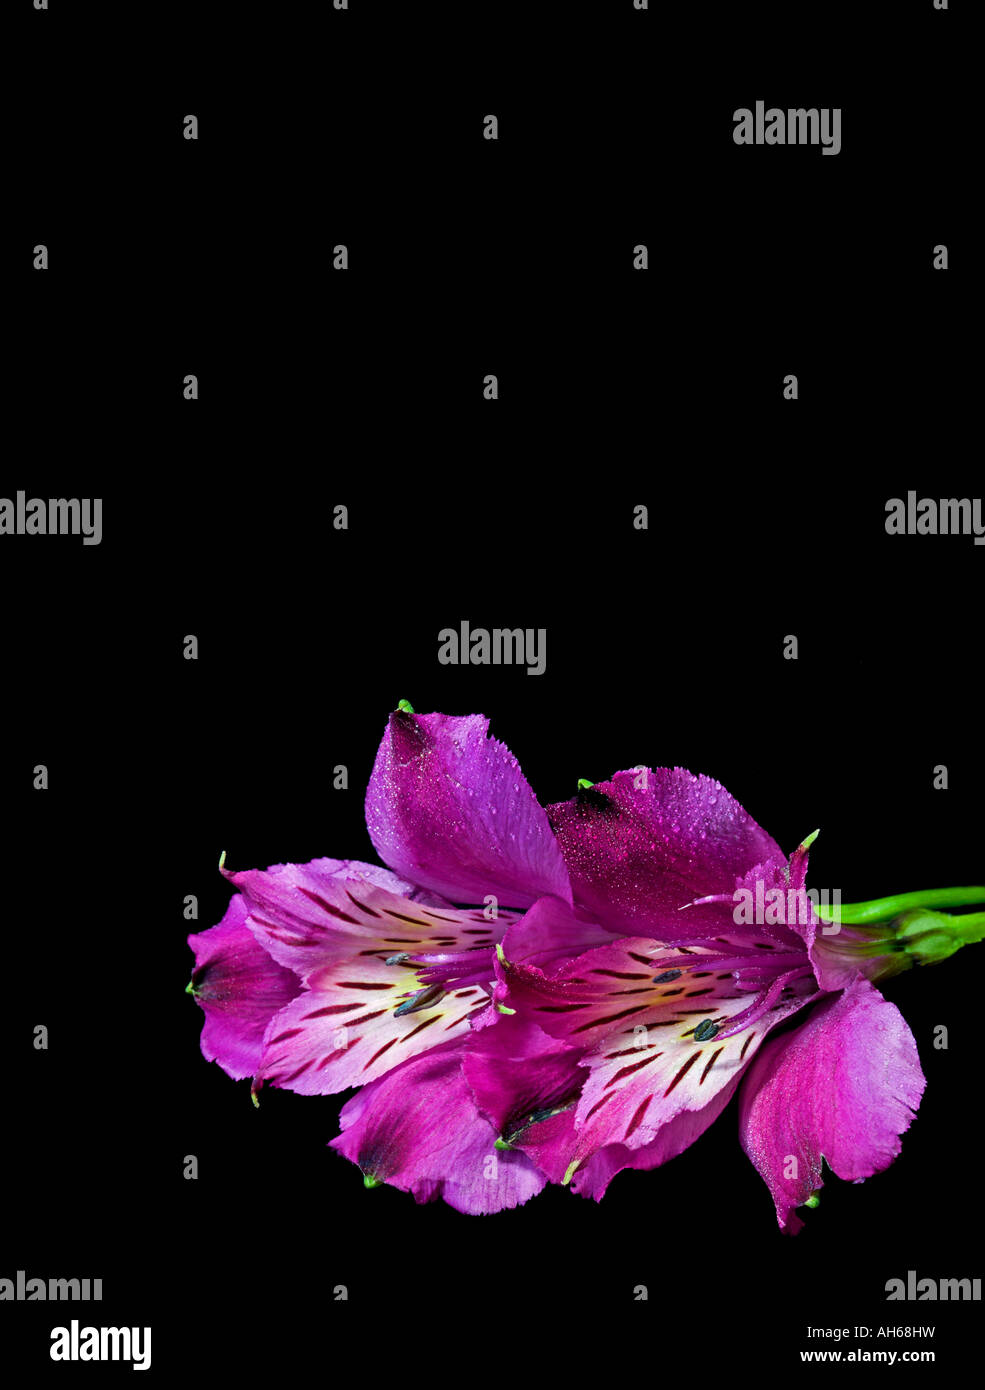 Purple Alstroemerias on black background with space for text message Stock Photo